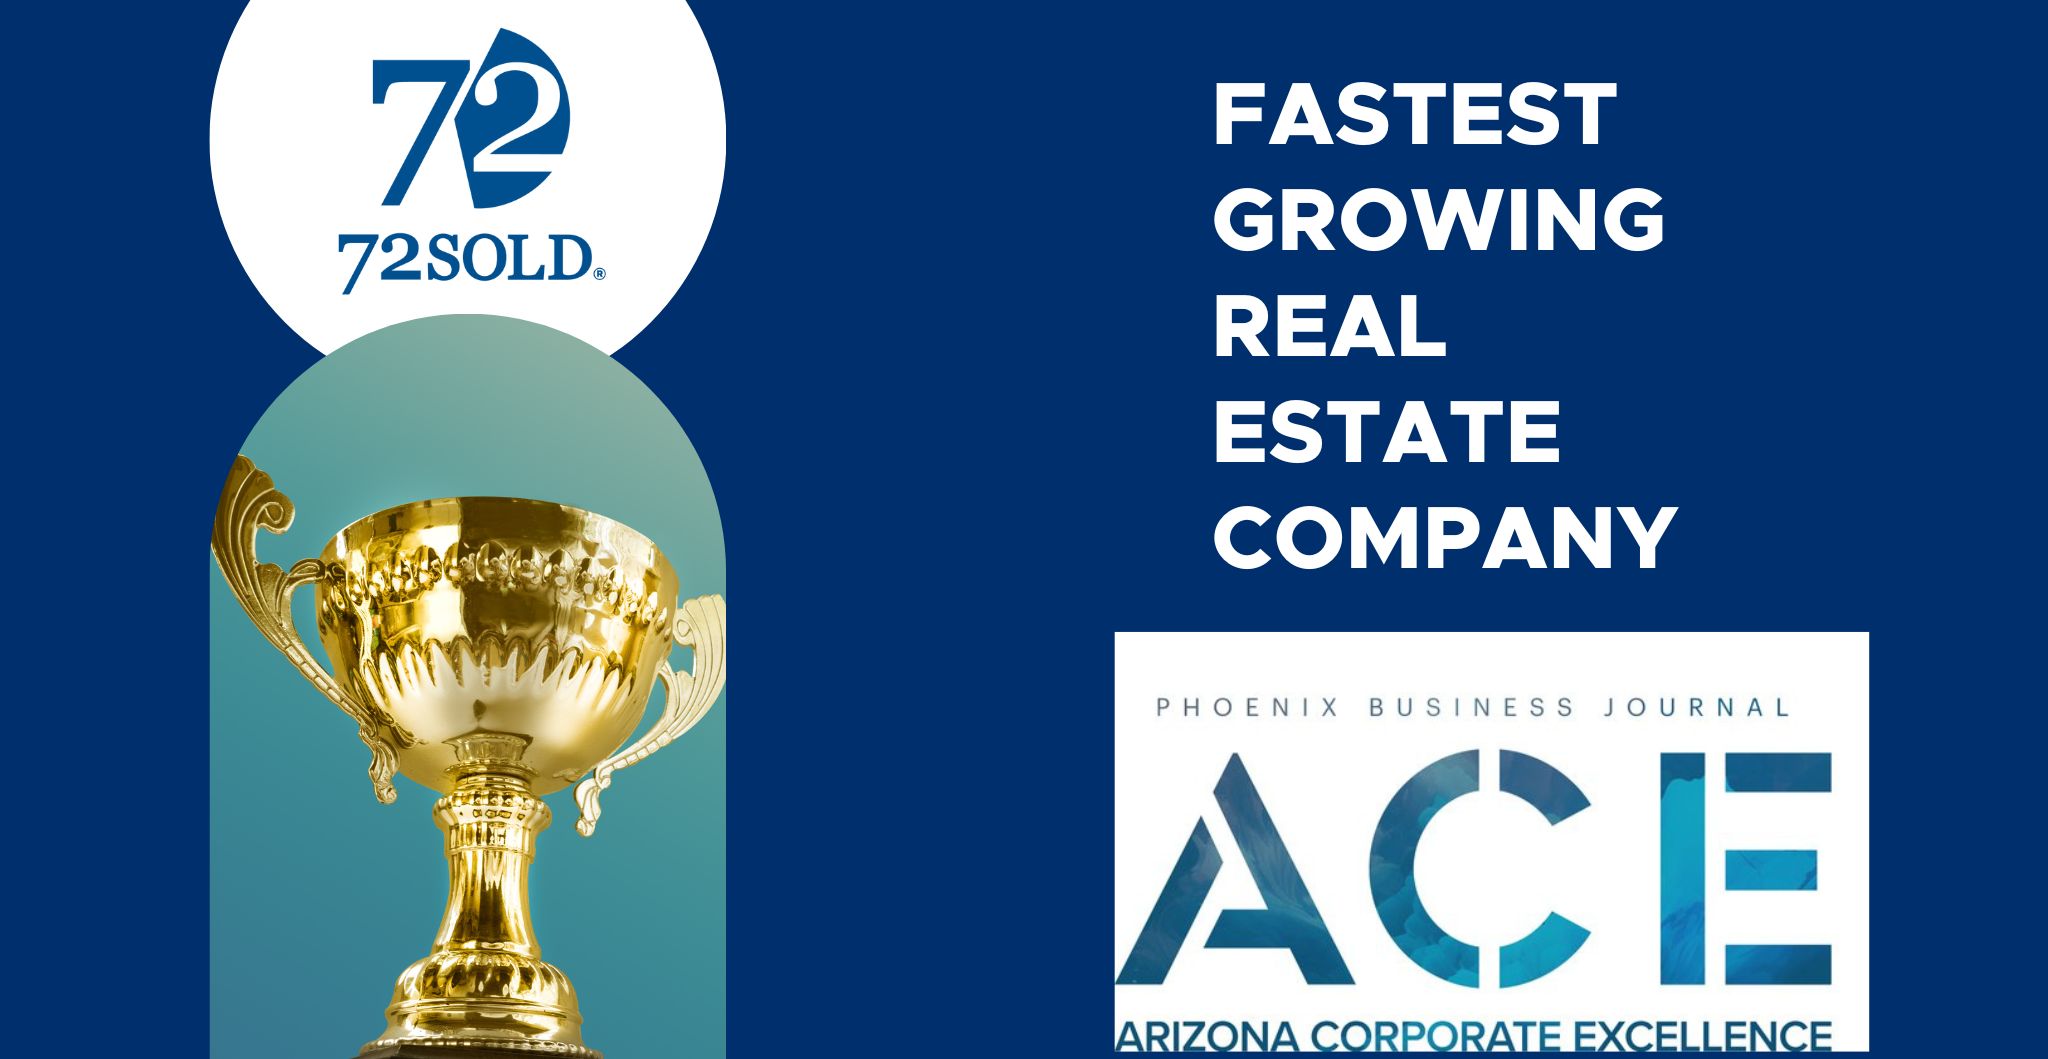 72SOLD is the #1 Fastest Growing Real Estate Companies